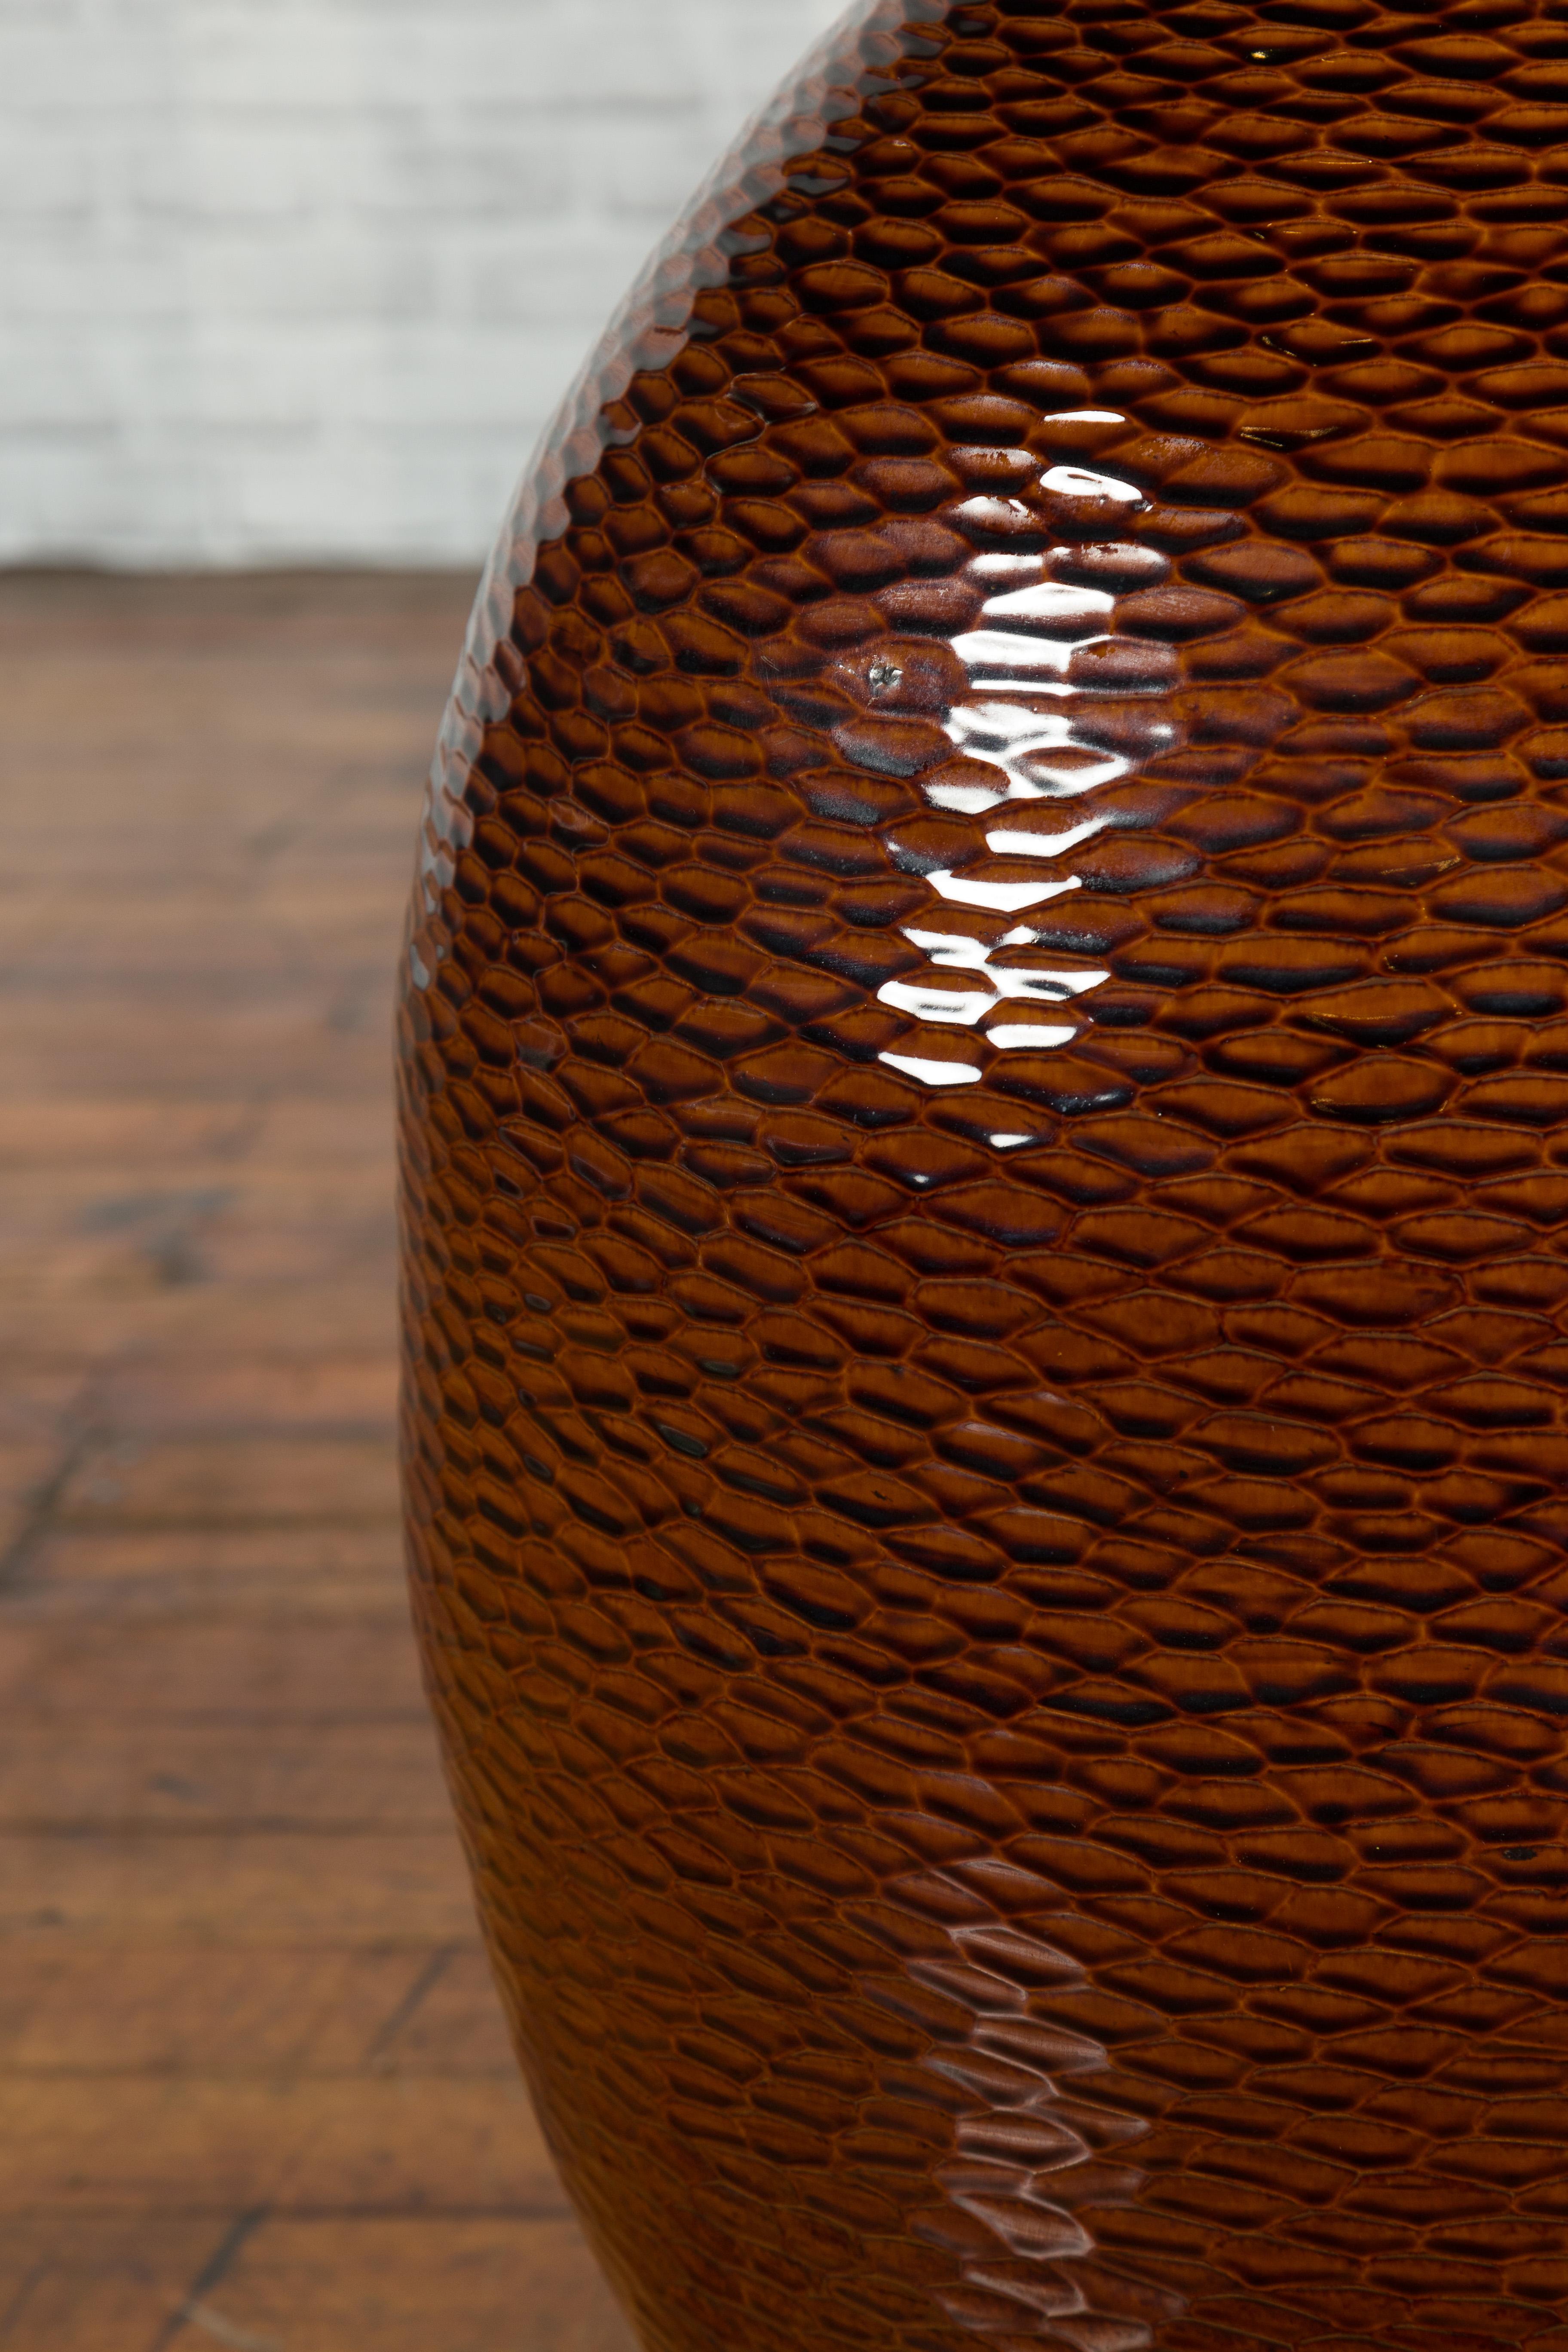 Thai Chiang Mai Brown Textured Teardrop Shaped Vase from the Prem Collection For Sale 1